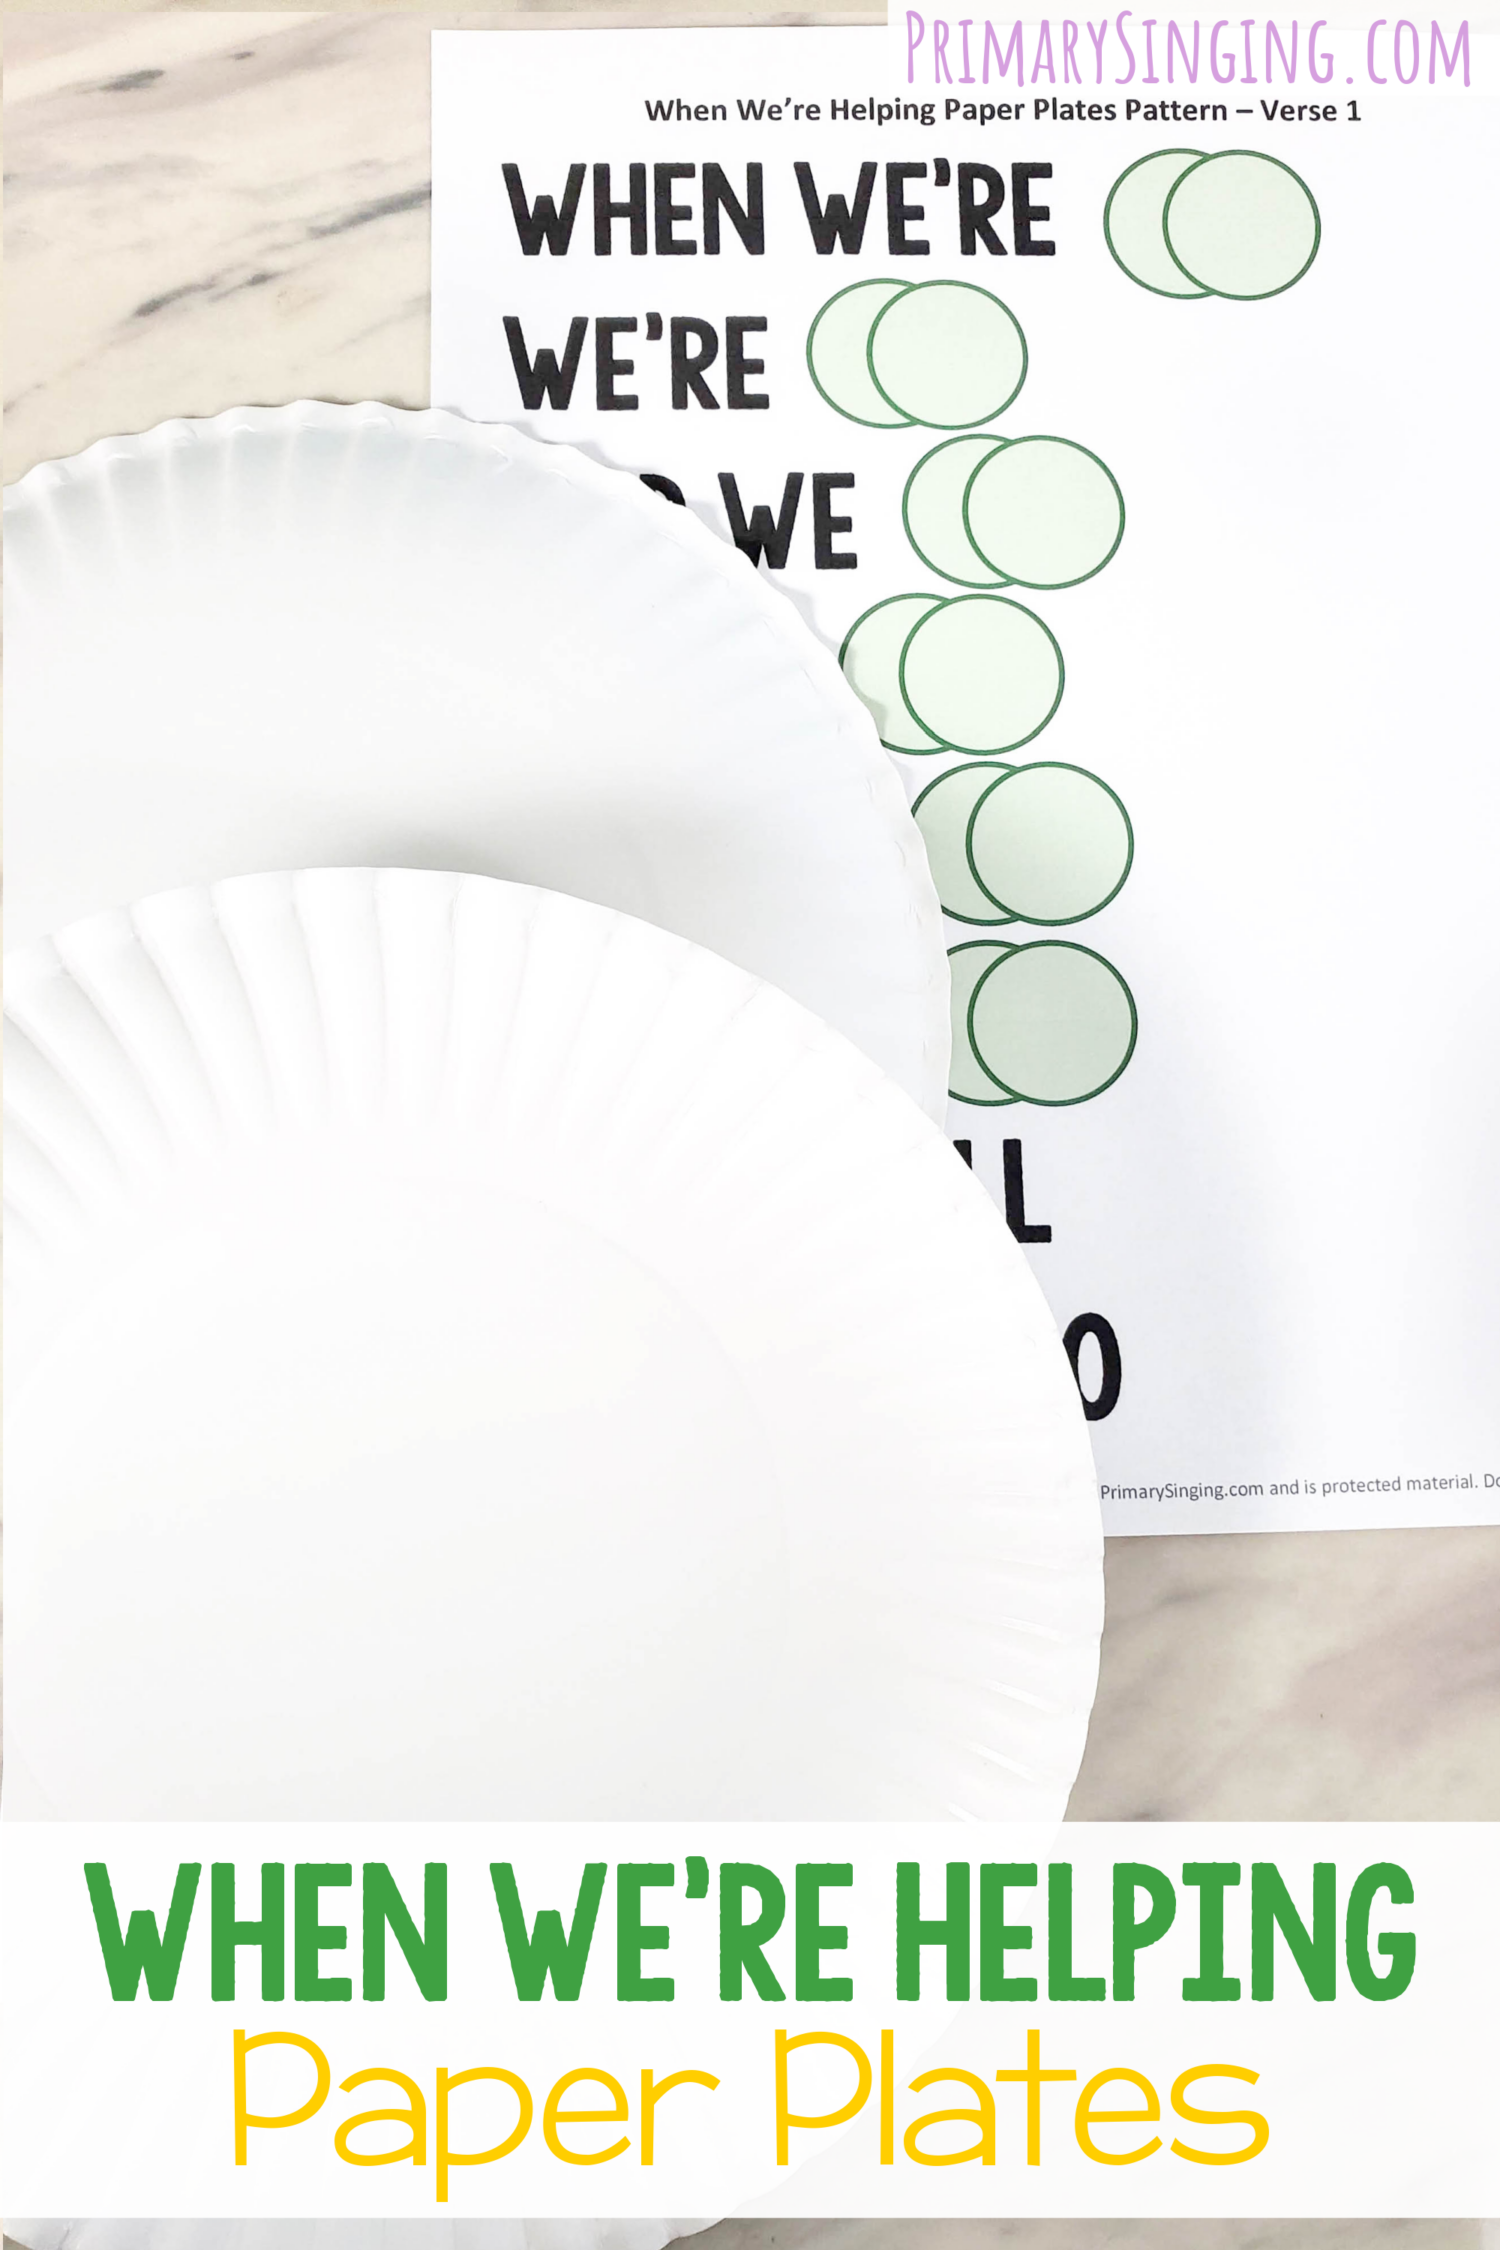 When We're Helping Paper Plates singing time activity to add in purposeful movement and some rhythm clapping on the main keywords plus more ways to play! Includes a printable pattern chart for LDS Primary music leaders.